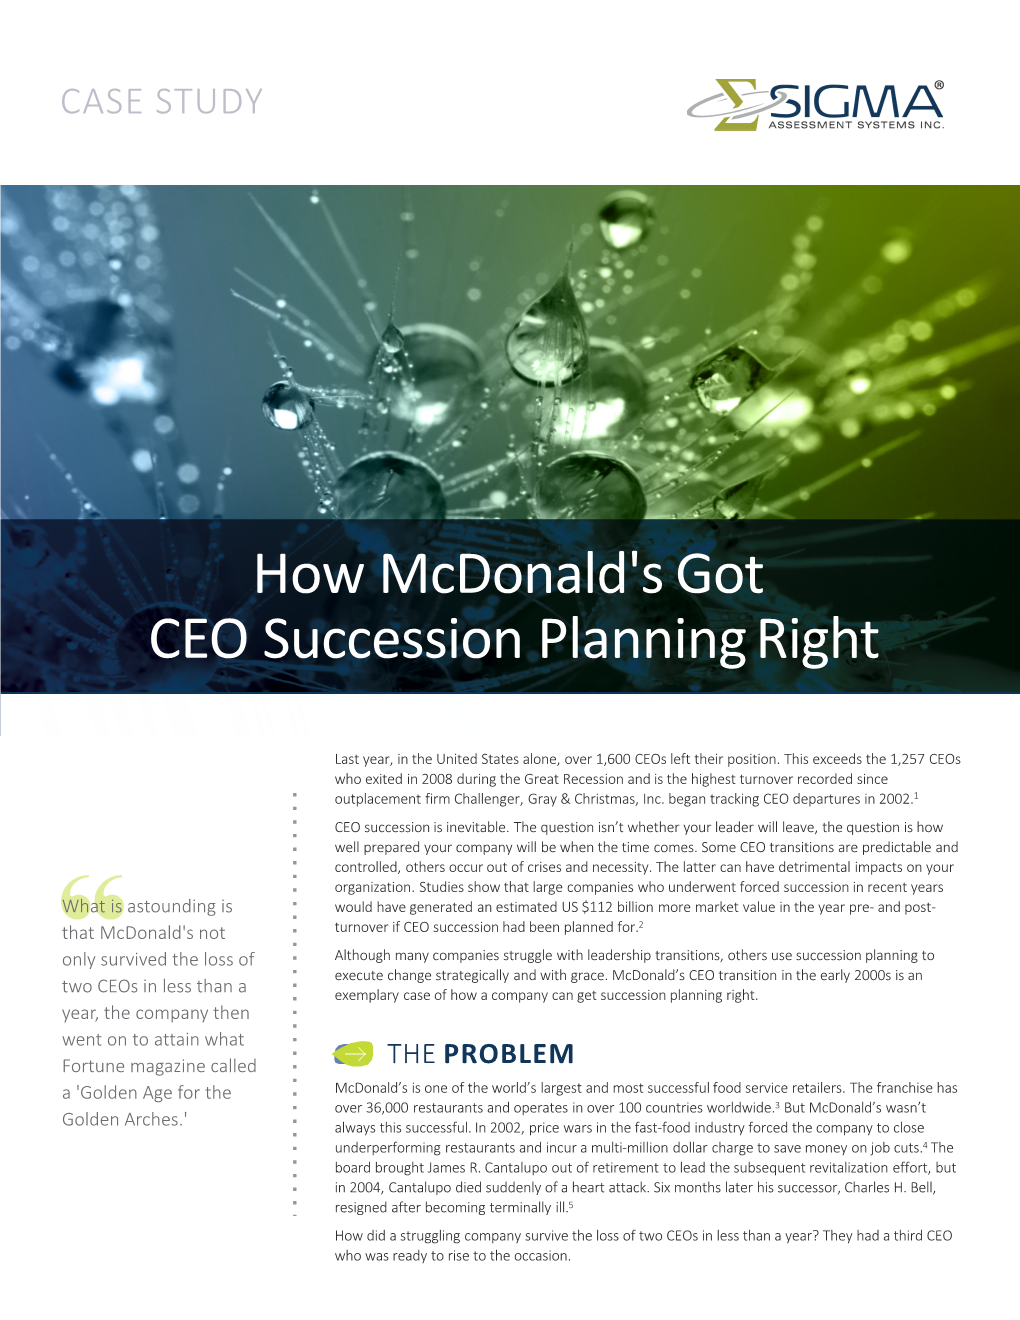 How Mcdonald's Got CEO Succession Planning Right